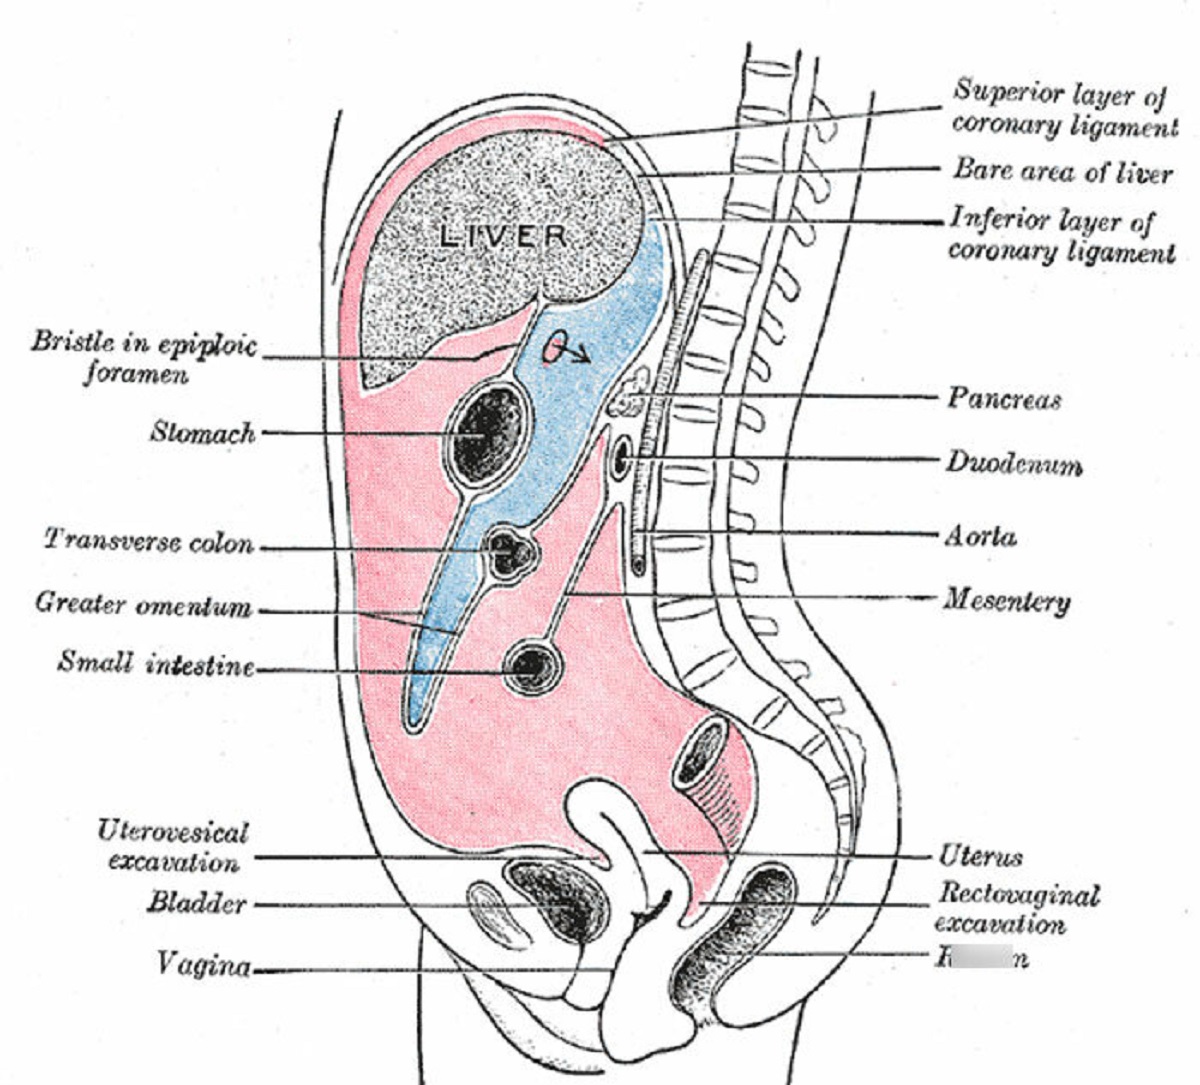 The intestines are covered by a double "fleece" of peritoneum. See it like a blanket.

When your intestines get damaged for whatever reason, this blanket starts moving out of itself and crawling upwards towards the place which has the injury. It will stay there until the injury is recovered. And then move on again.

Maybe not the most creepy fact, but definitely interesting in my opinion.